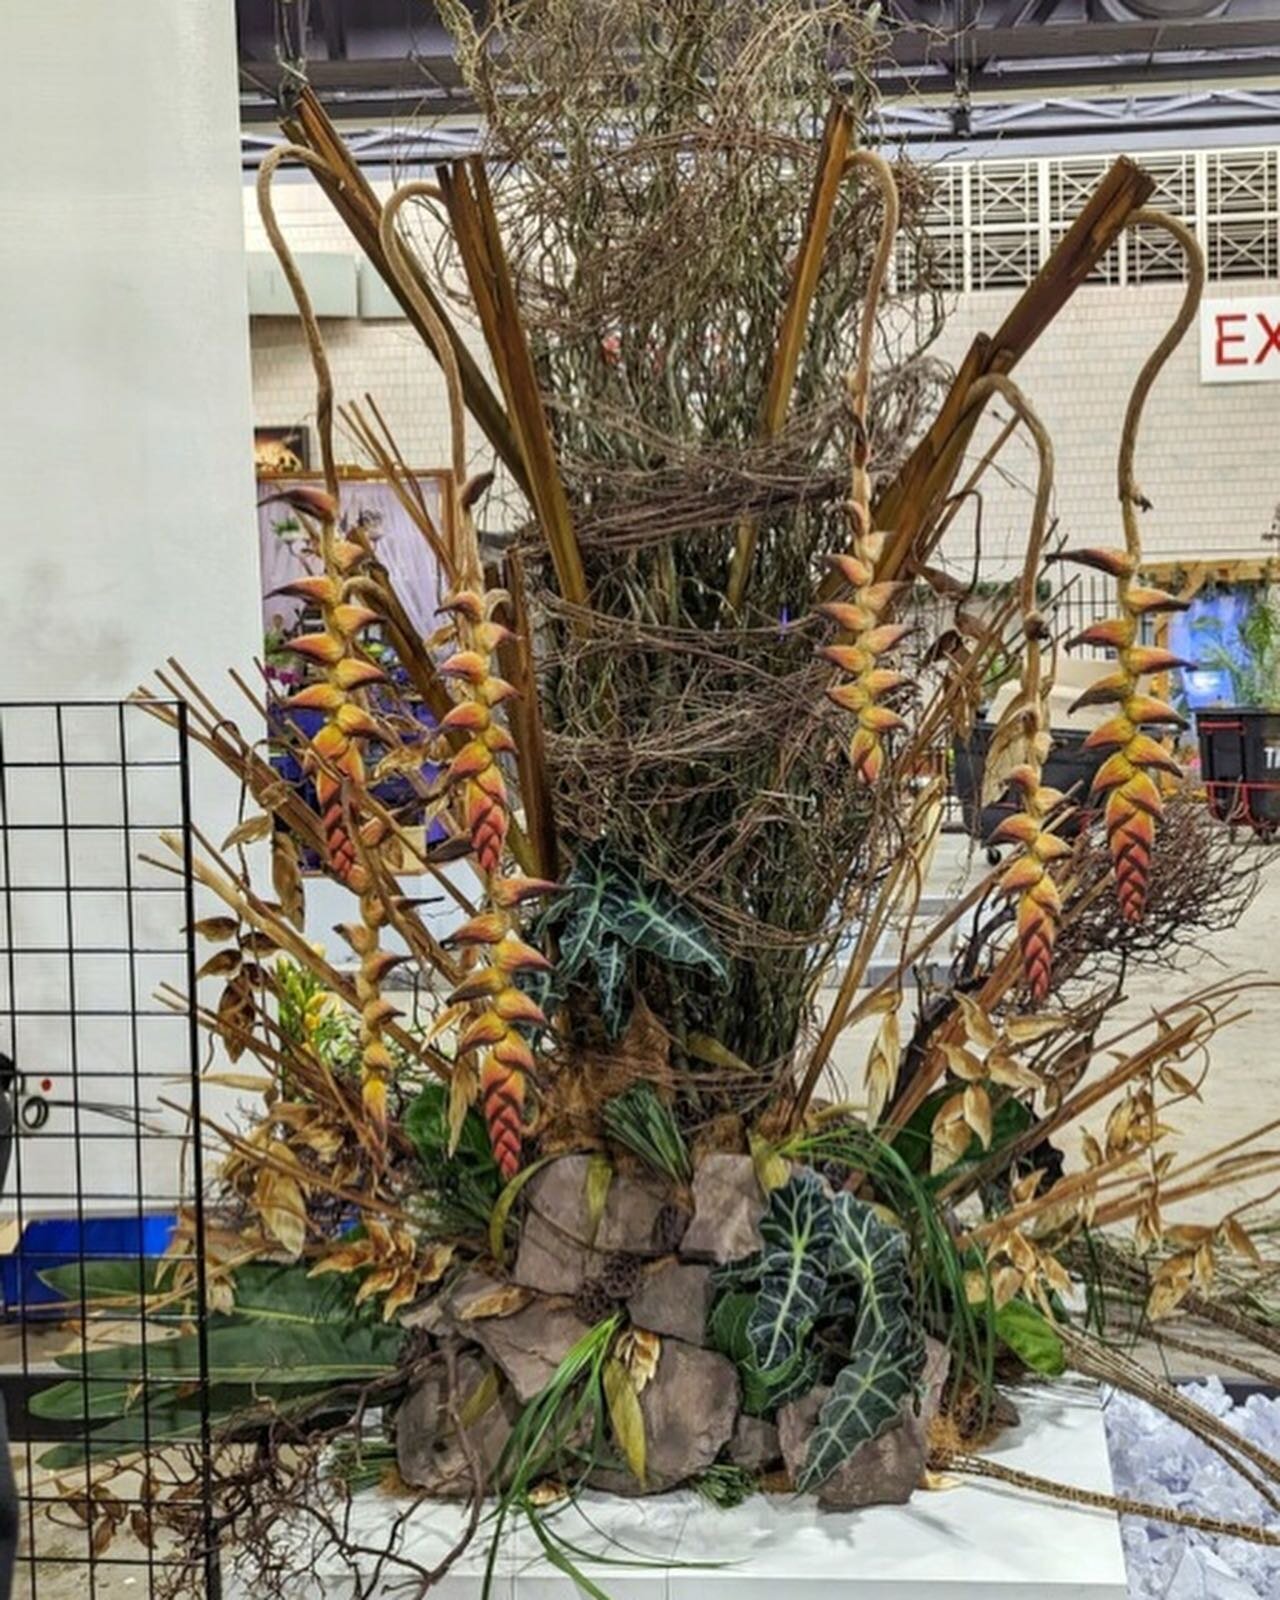 Doors open to the @phsgardening Philadelphia Flower Show tomorrow!  Grab your tickets and be sure to visit the AIFD exhibit and snap a pic of my installation!

Thank you to @aifdnortheast for the honor and opportunity. It was a privilege to work with